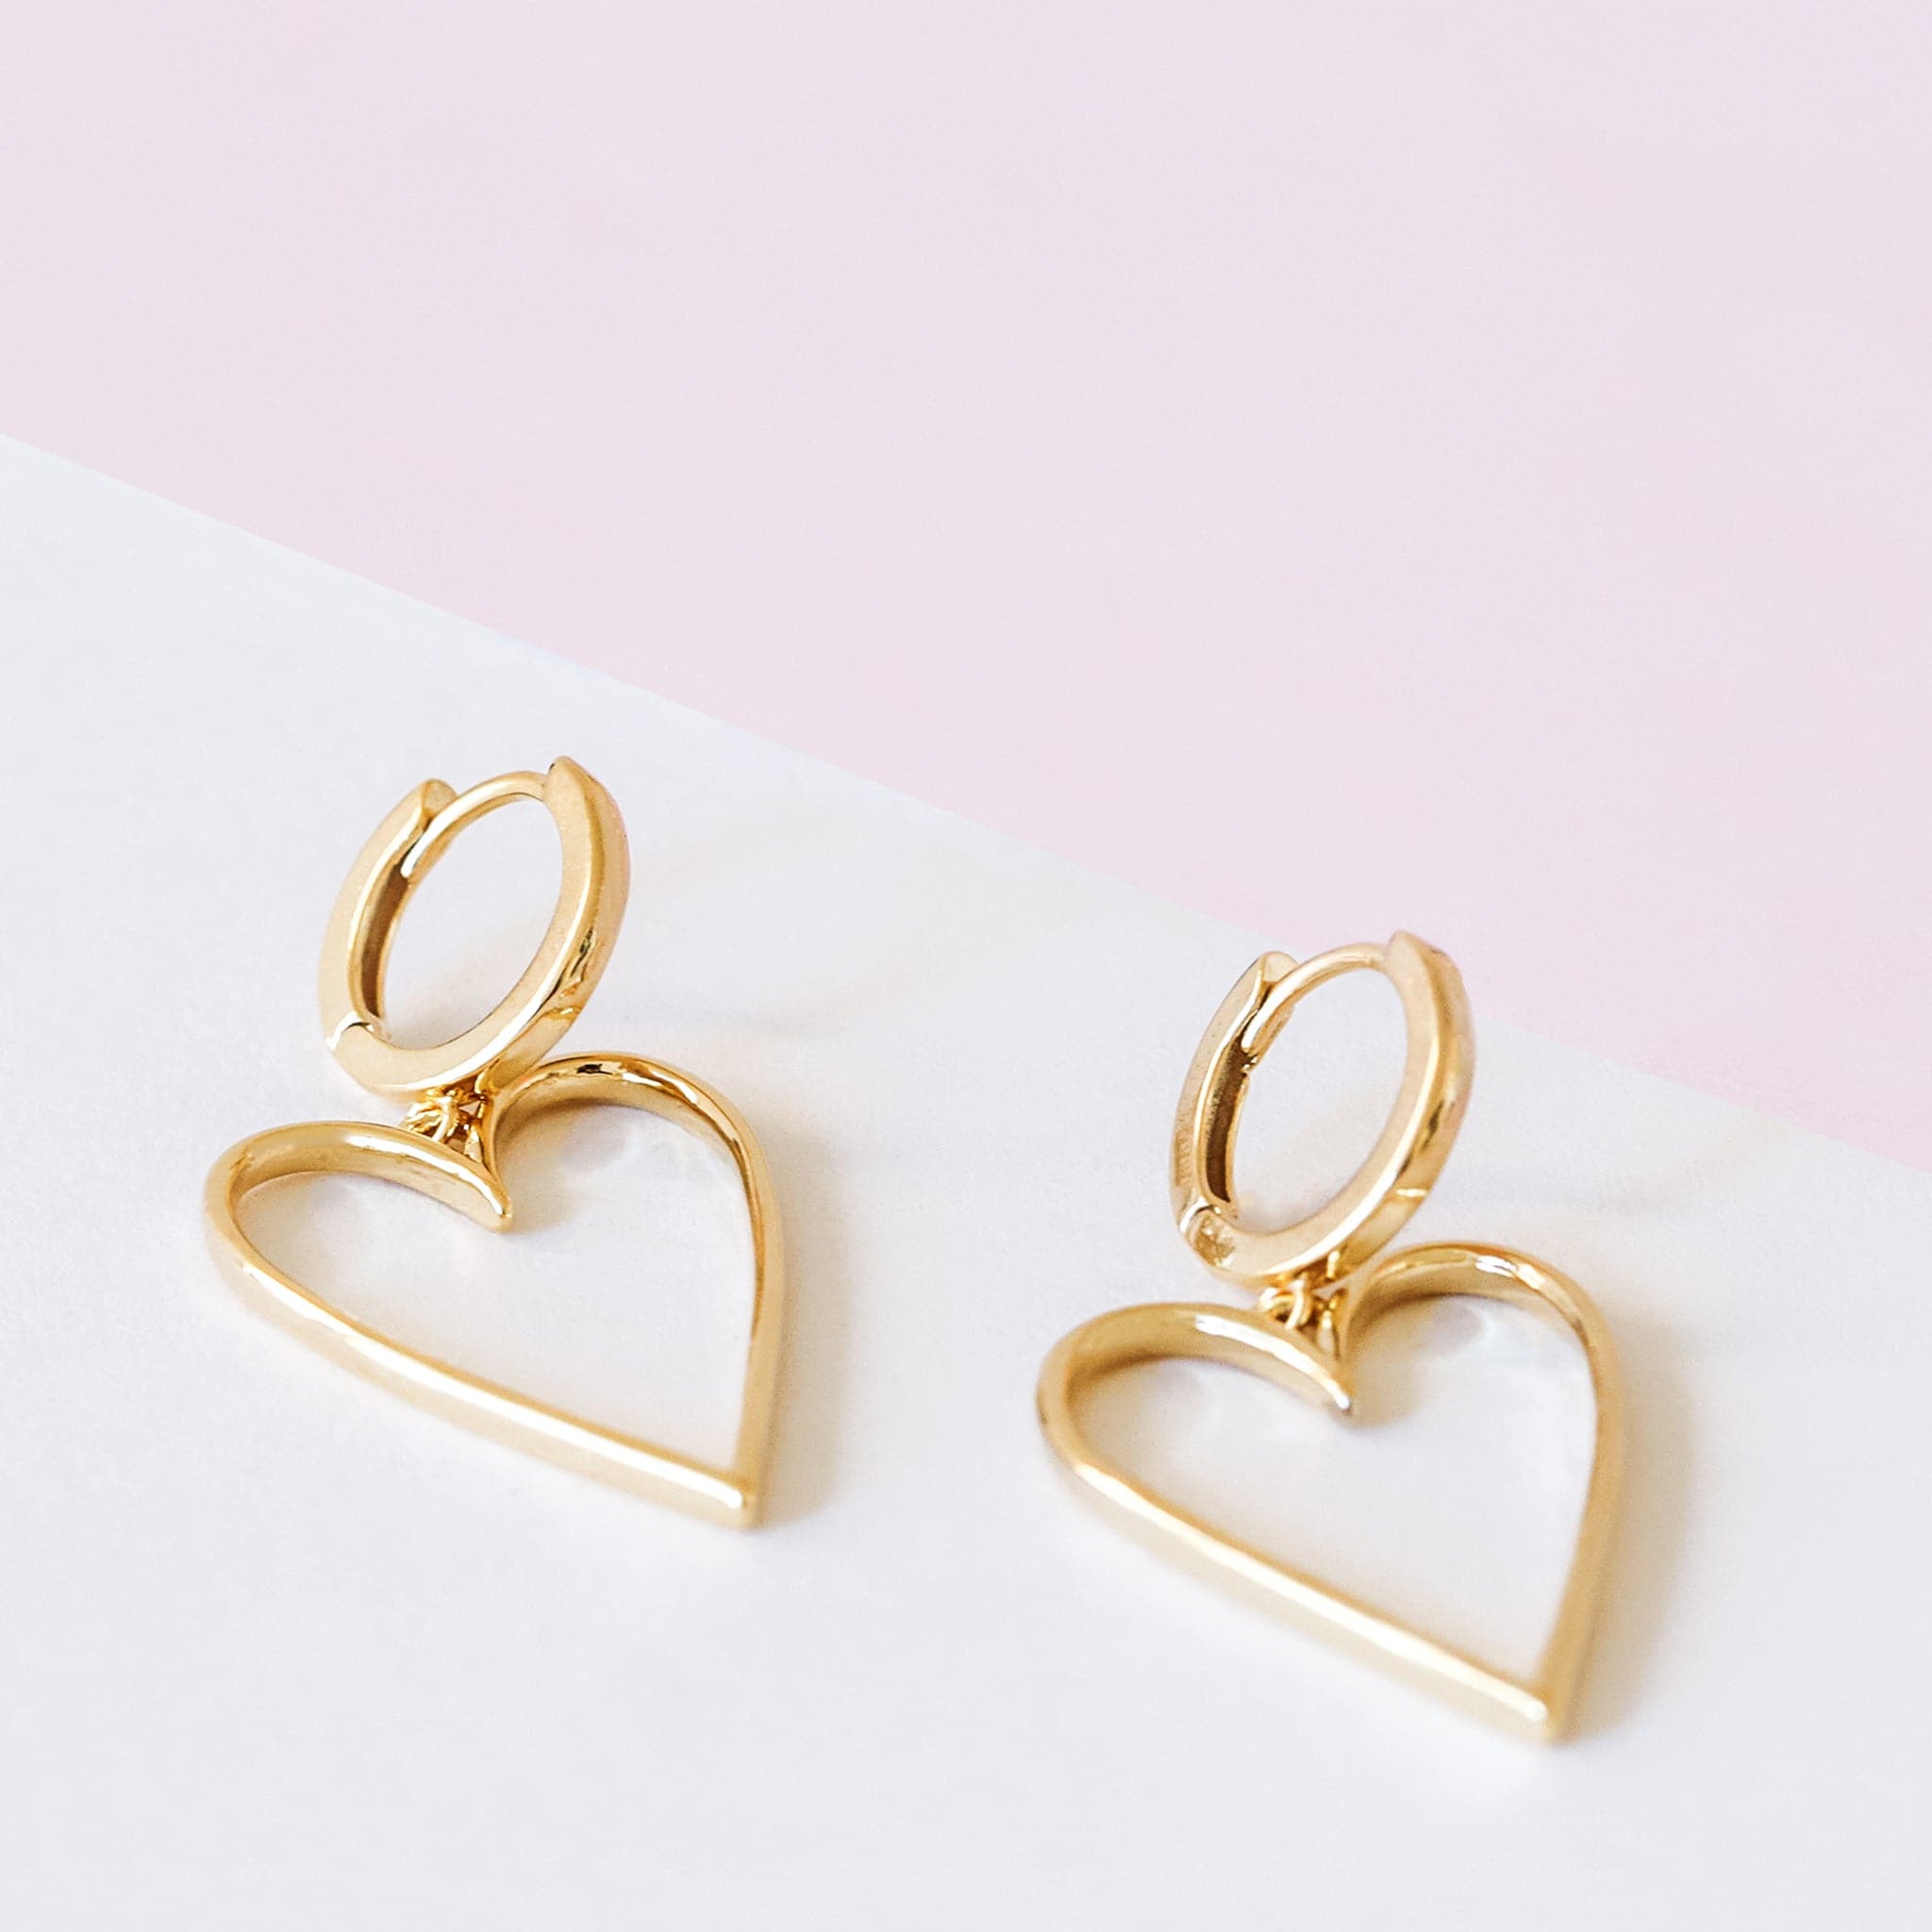 A pair of gold hoop earrings with a larger hold heart shape hoop attached to that.